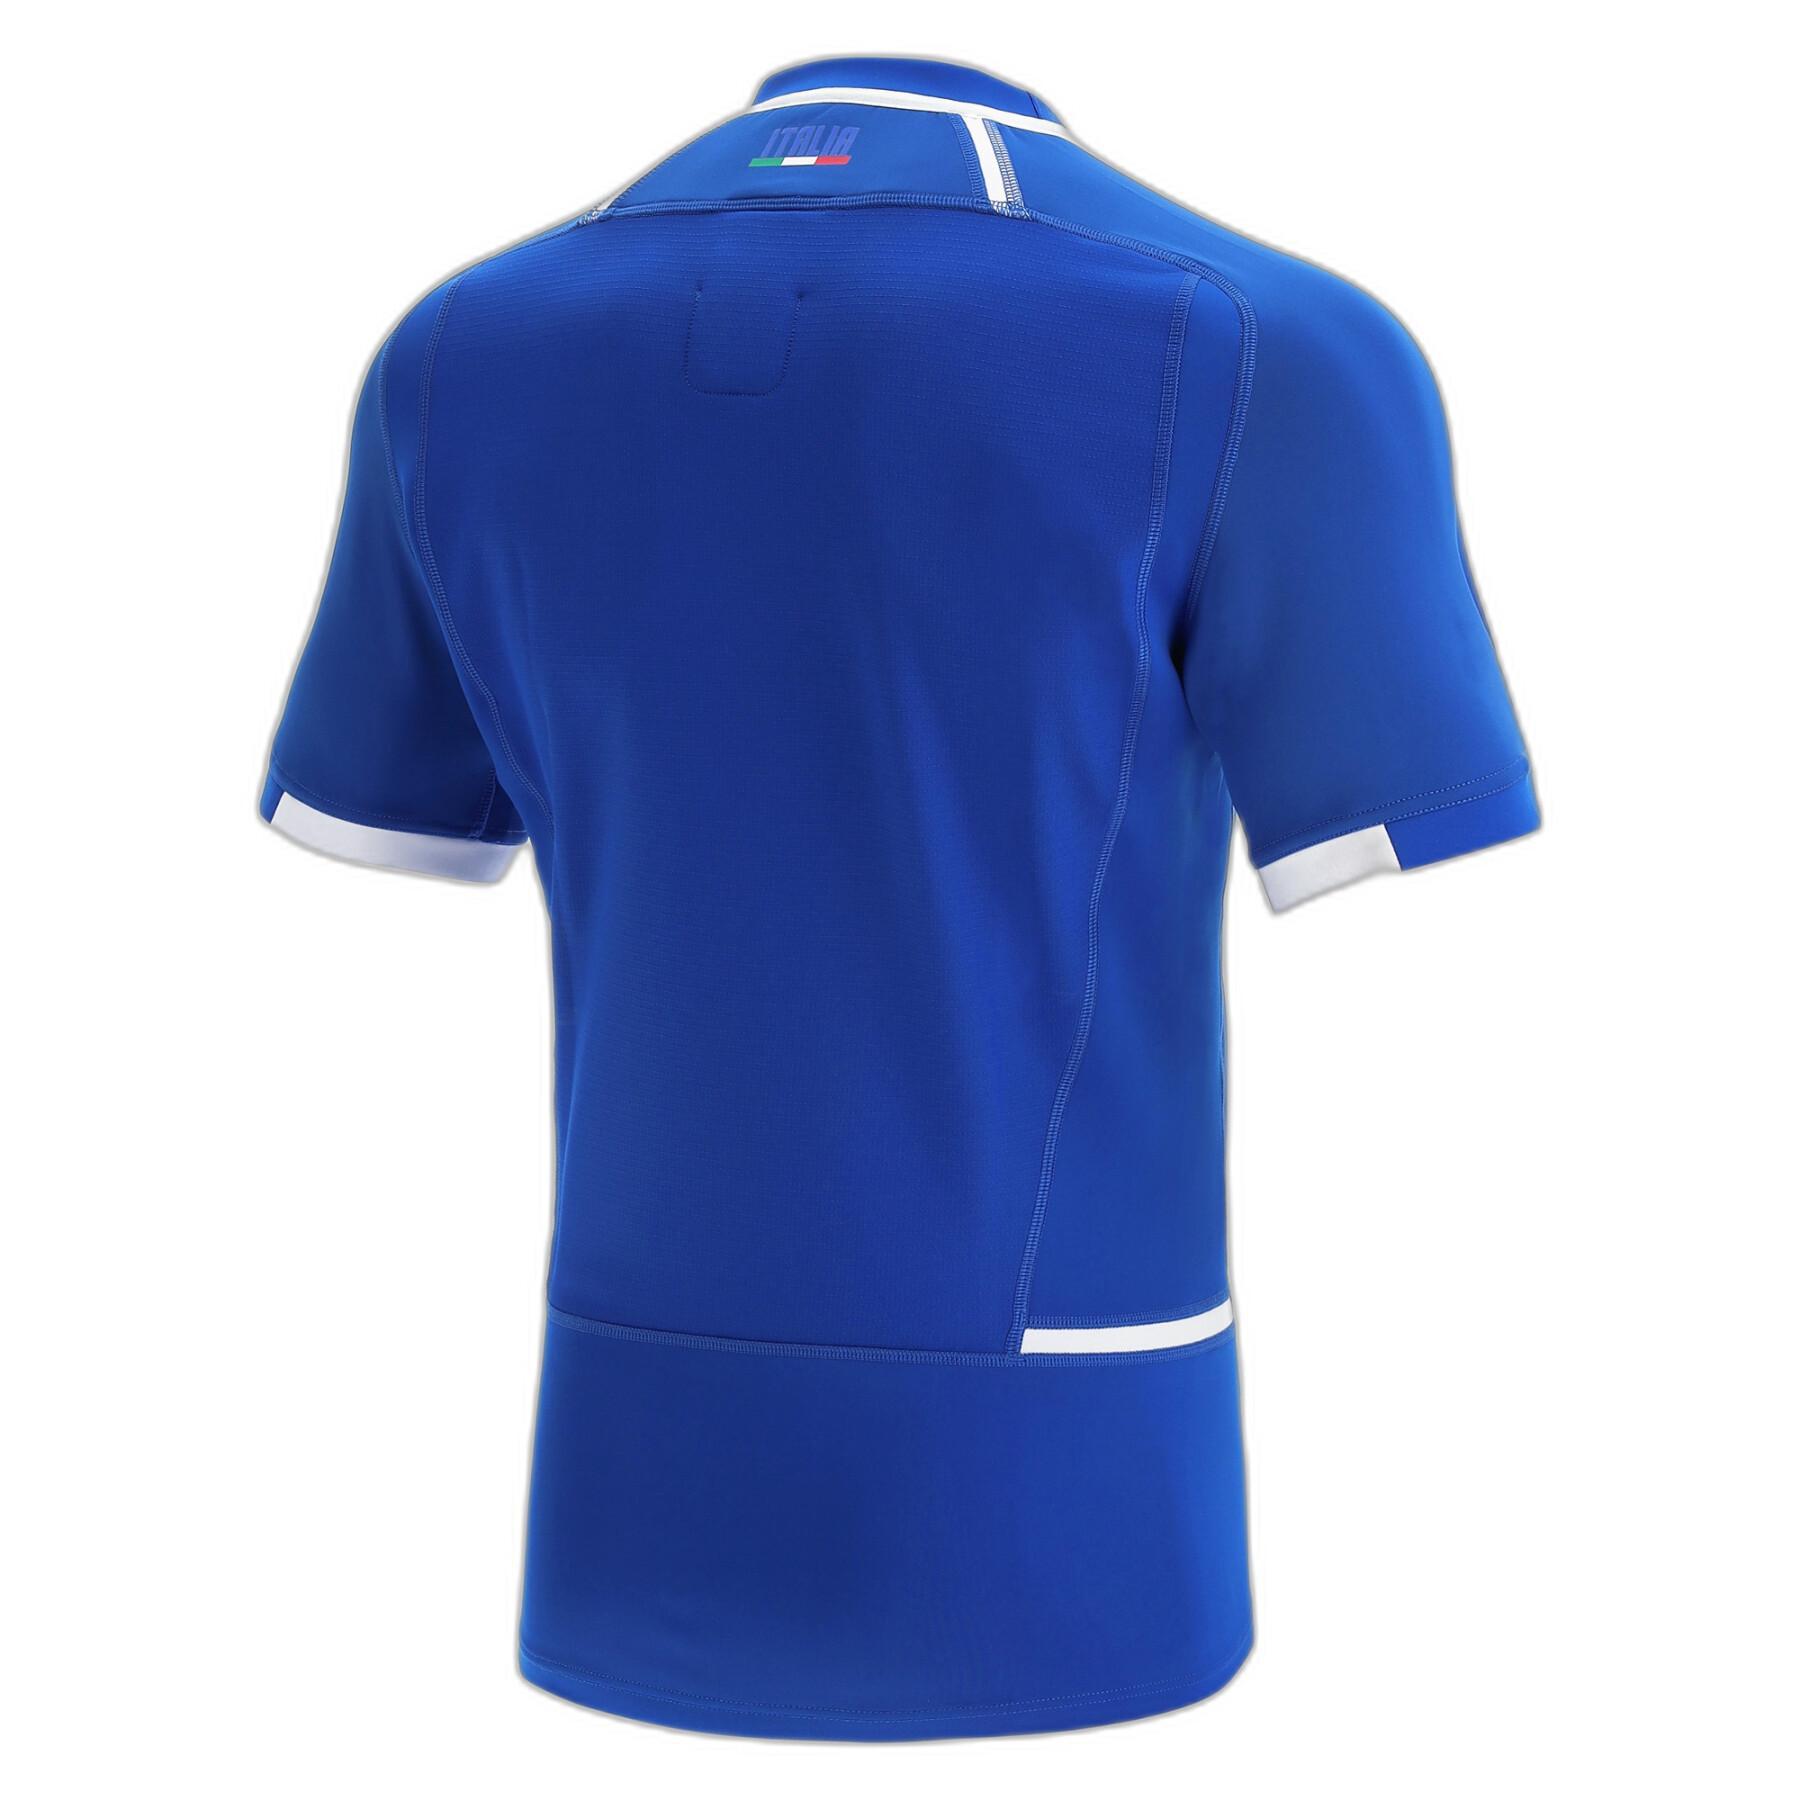 Home jersey Italie Rugby 2021